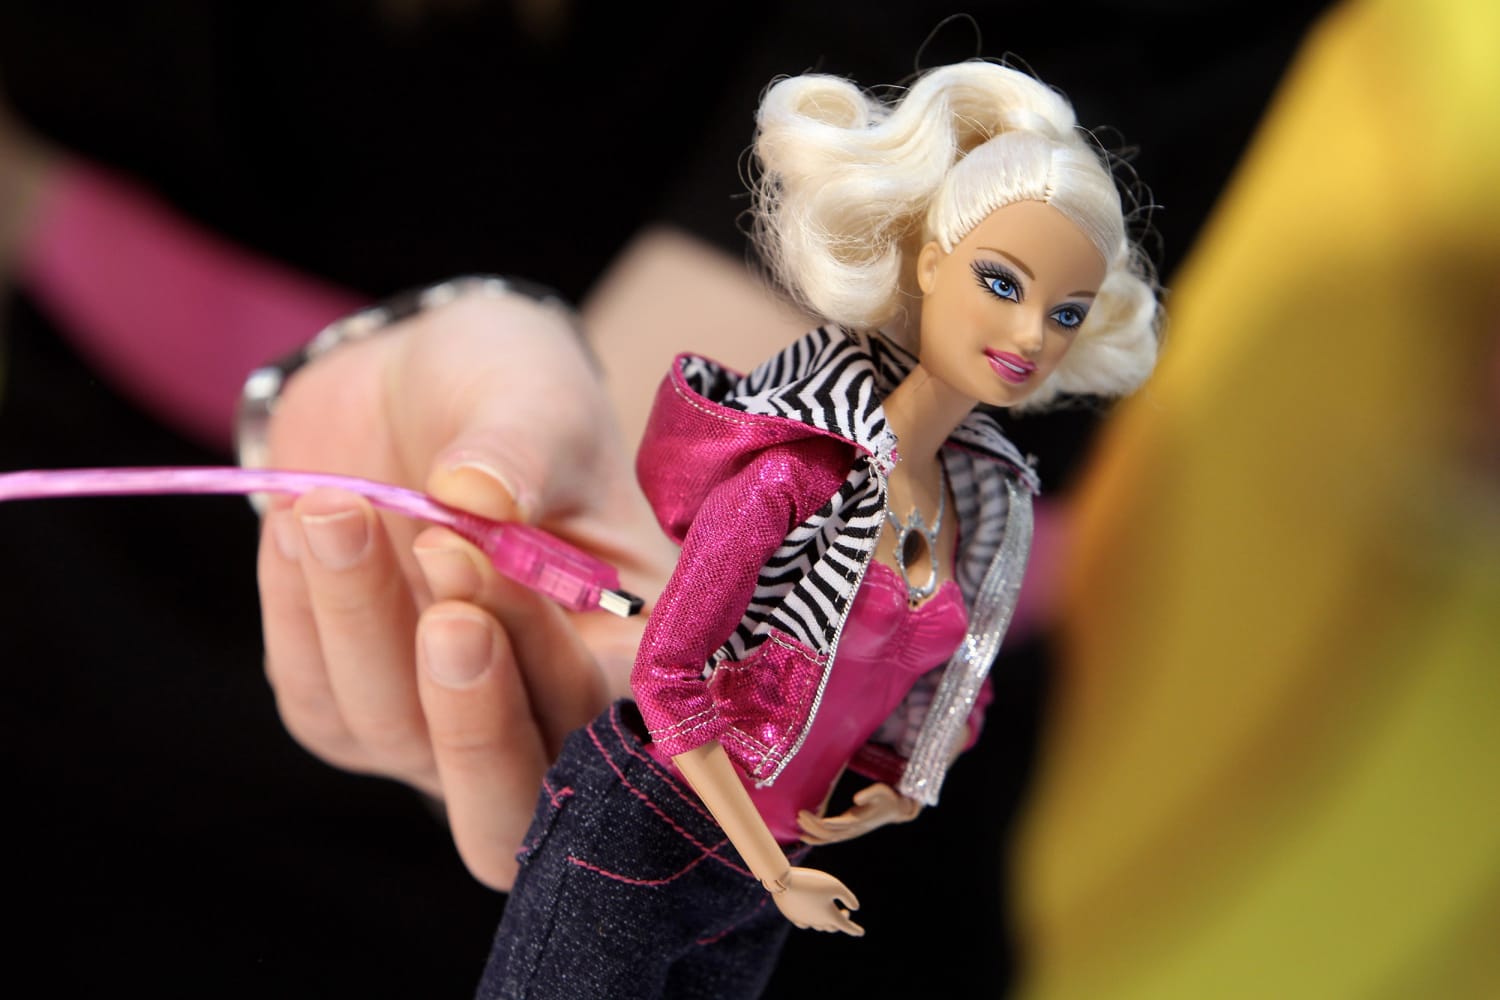 Allan Doll Prices Surge After Release Of 'Barbie' Movie